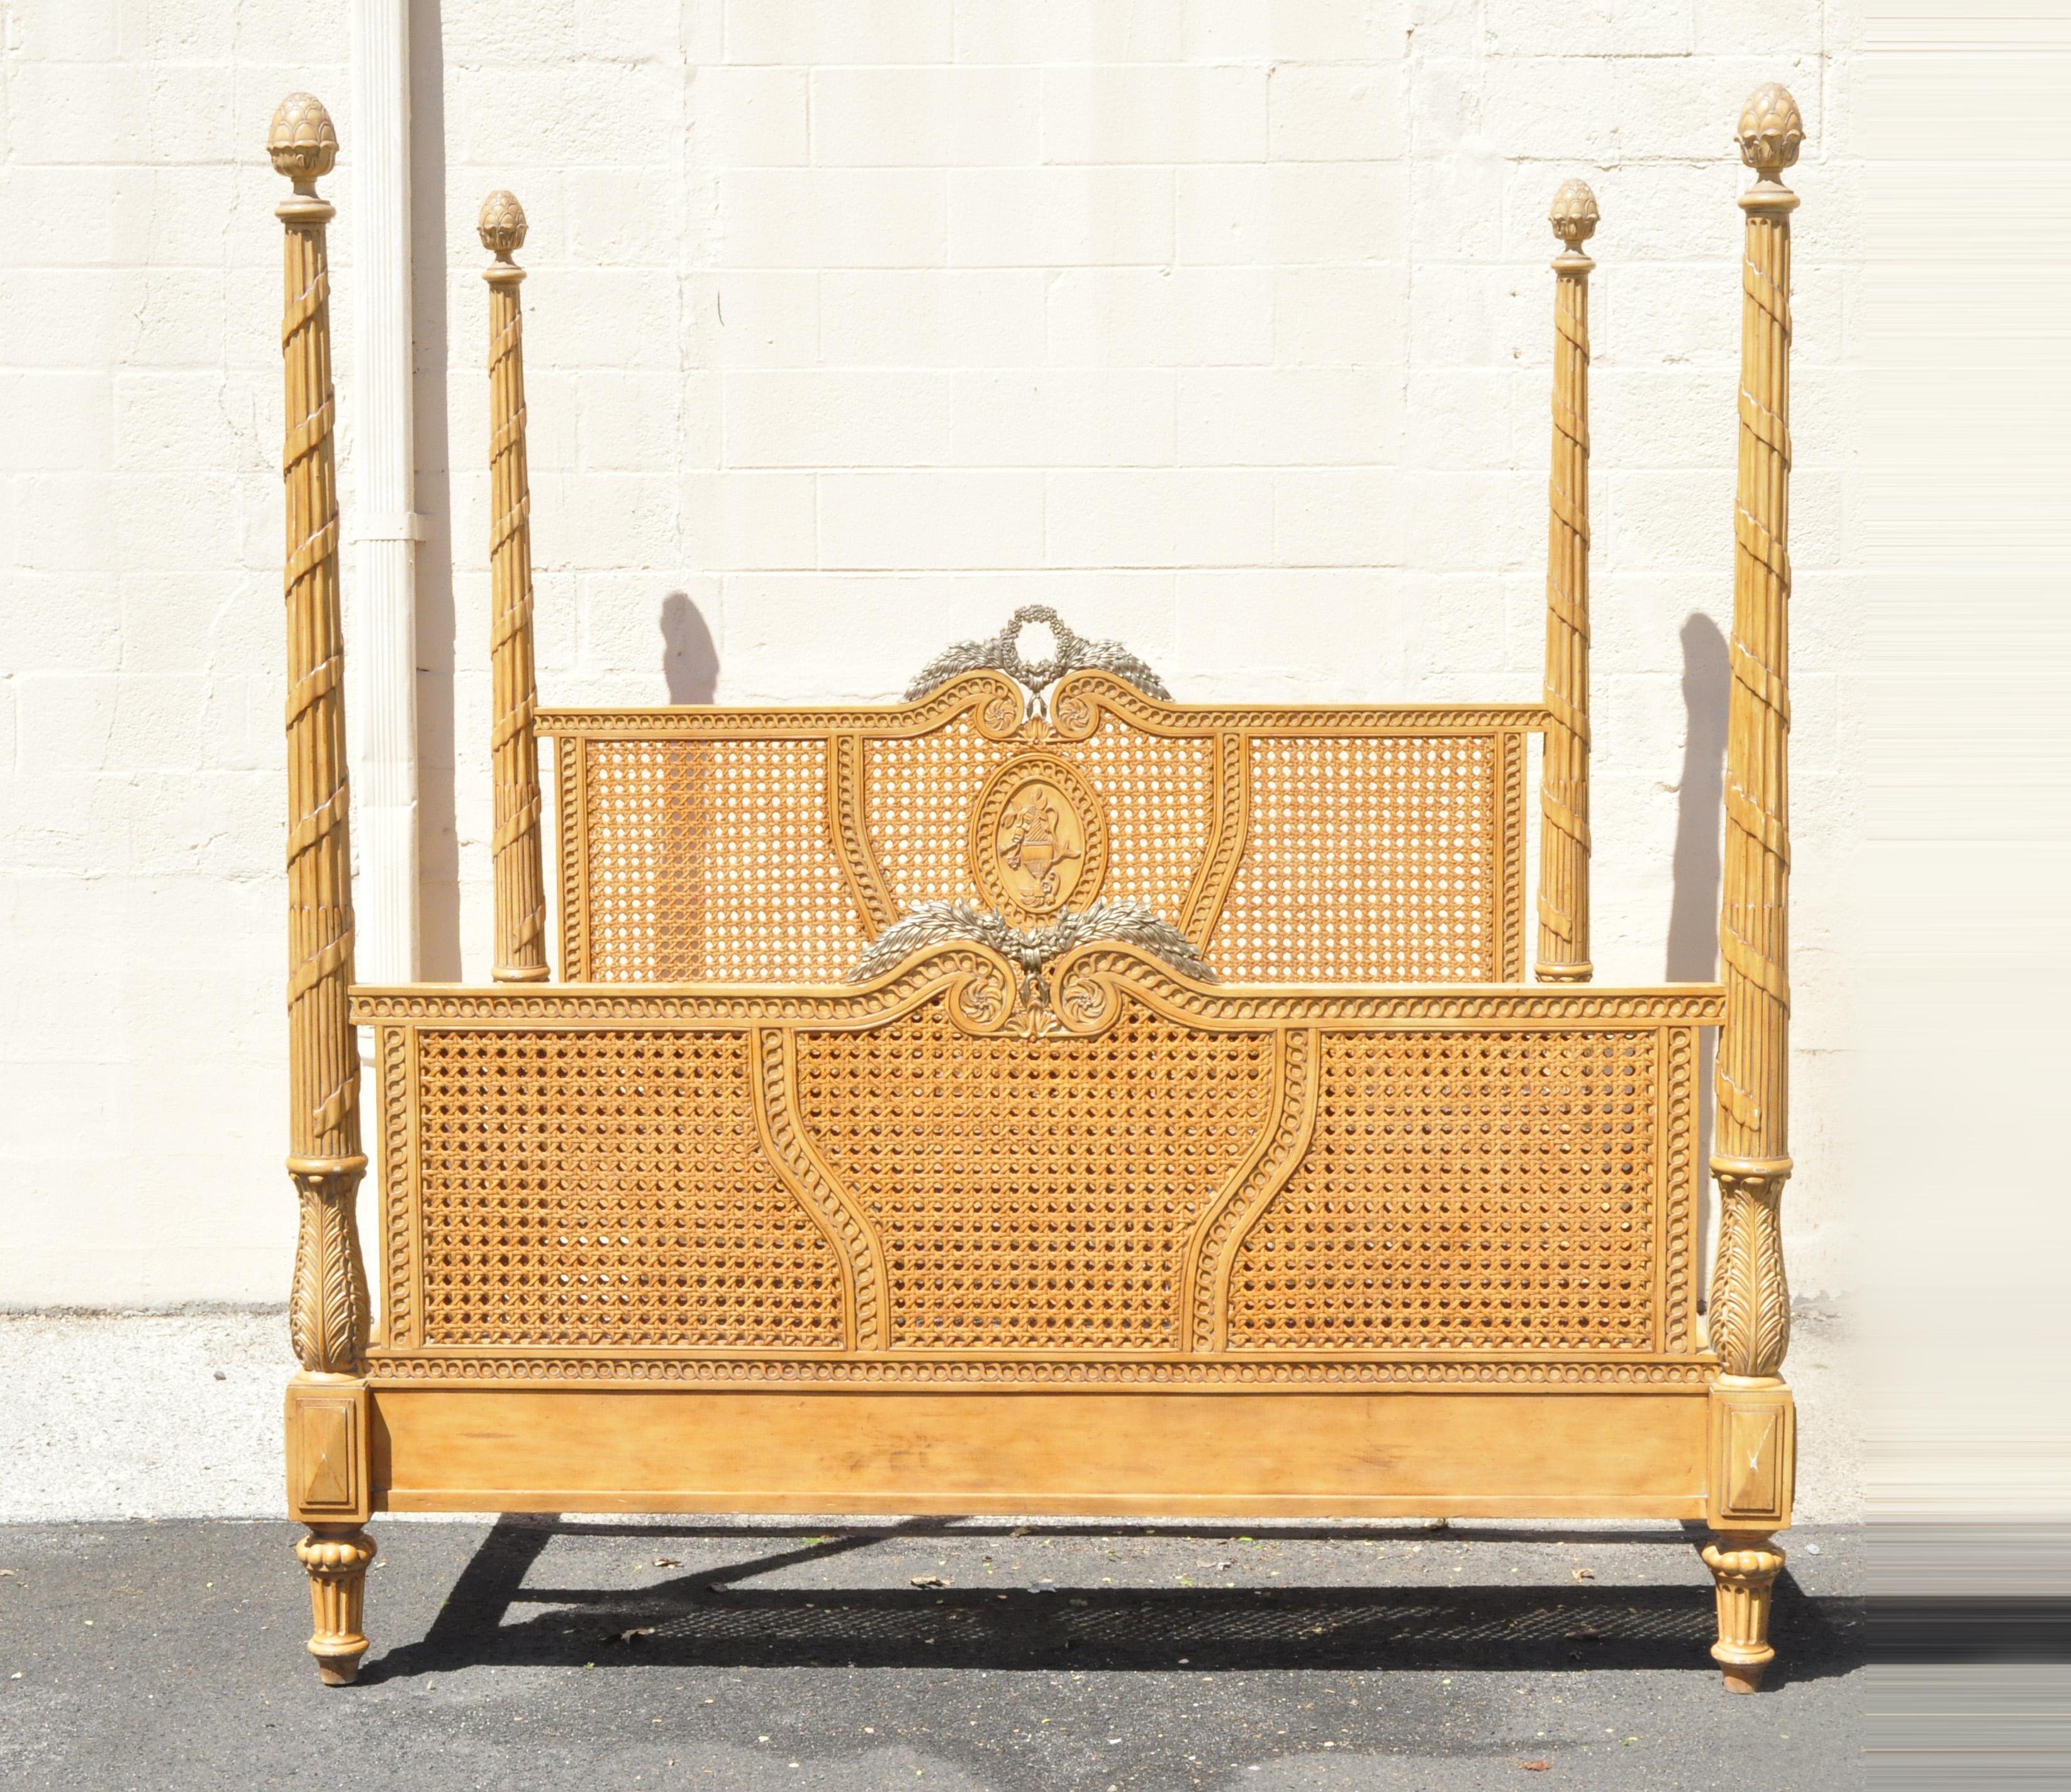 Drexel Heritage Legacy collection 4-post king size cane poster bed Italian style. Item features double cane footboard and headboard, cast metal wreath ormolu, tall carved posts, solid wood construction, distressed finish, nicely carved details,